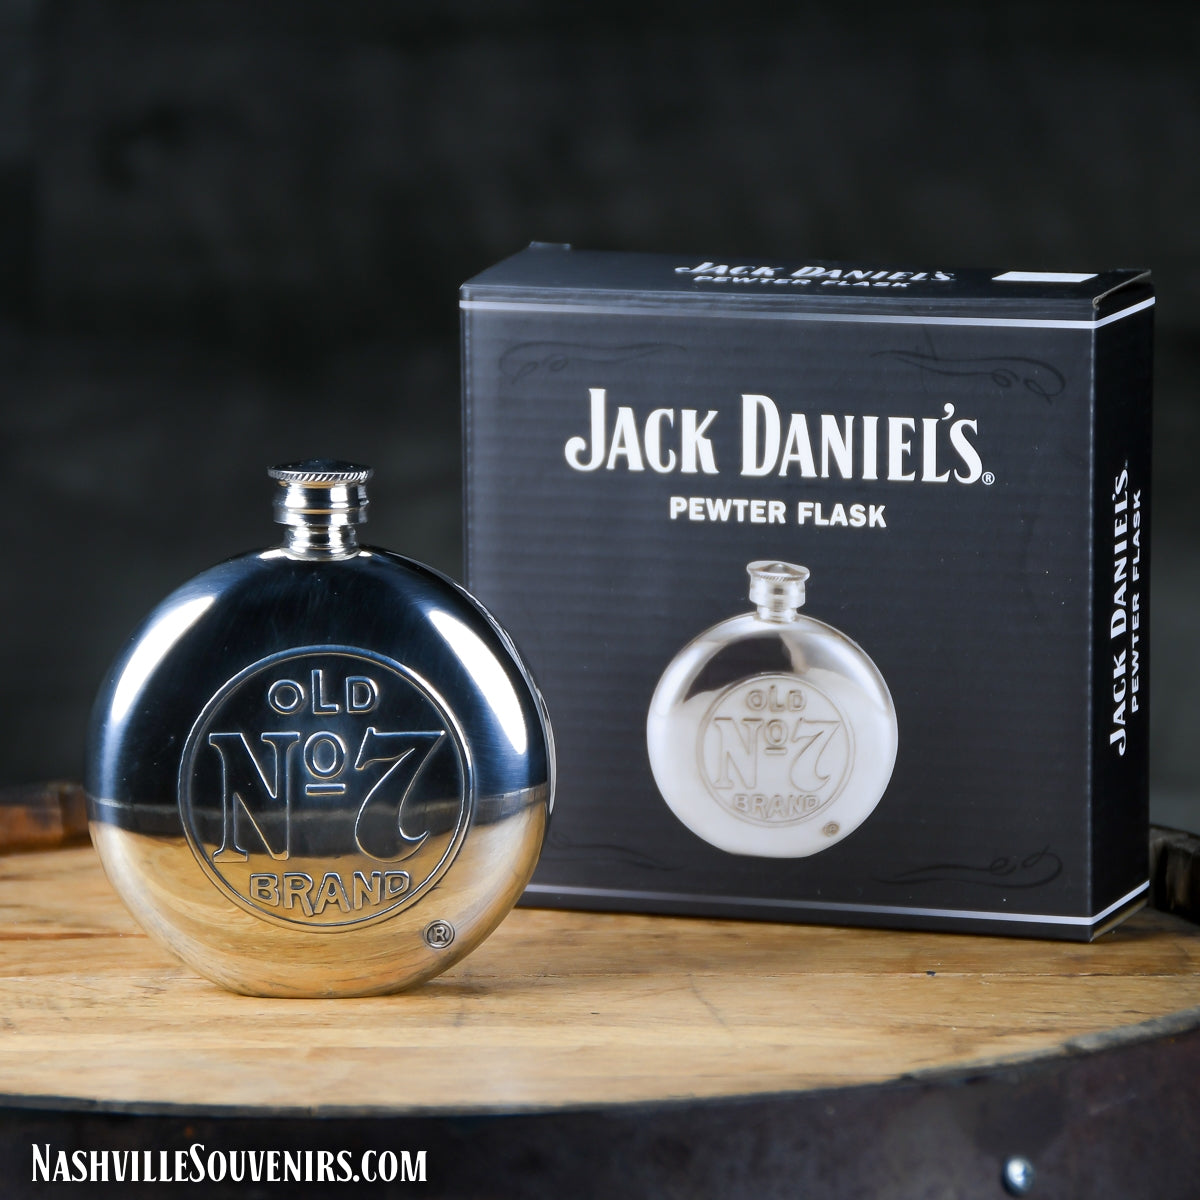 Round Jack Daniels Old No. 7 Brand Pewter Flask